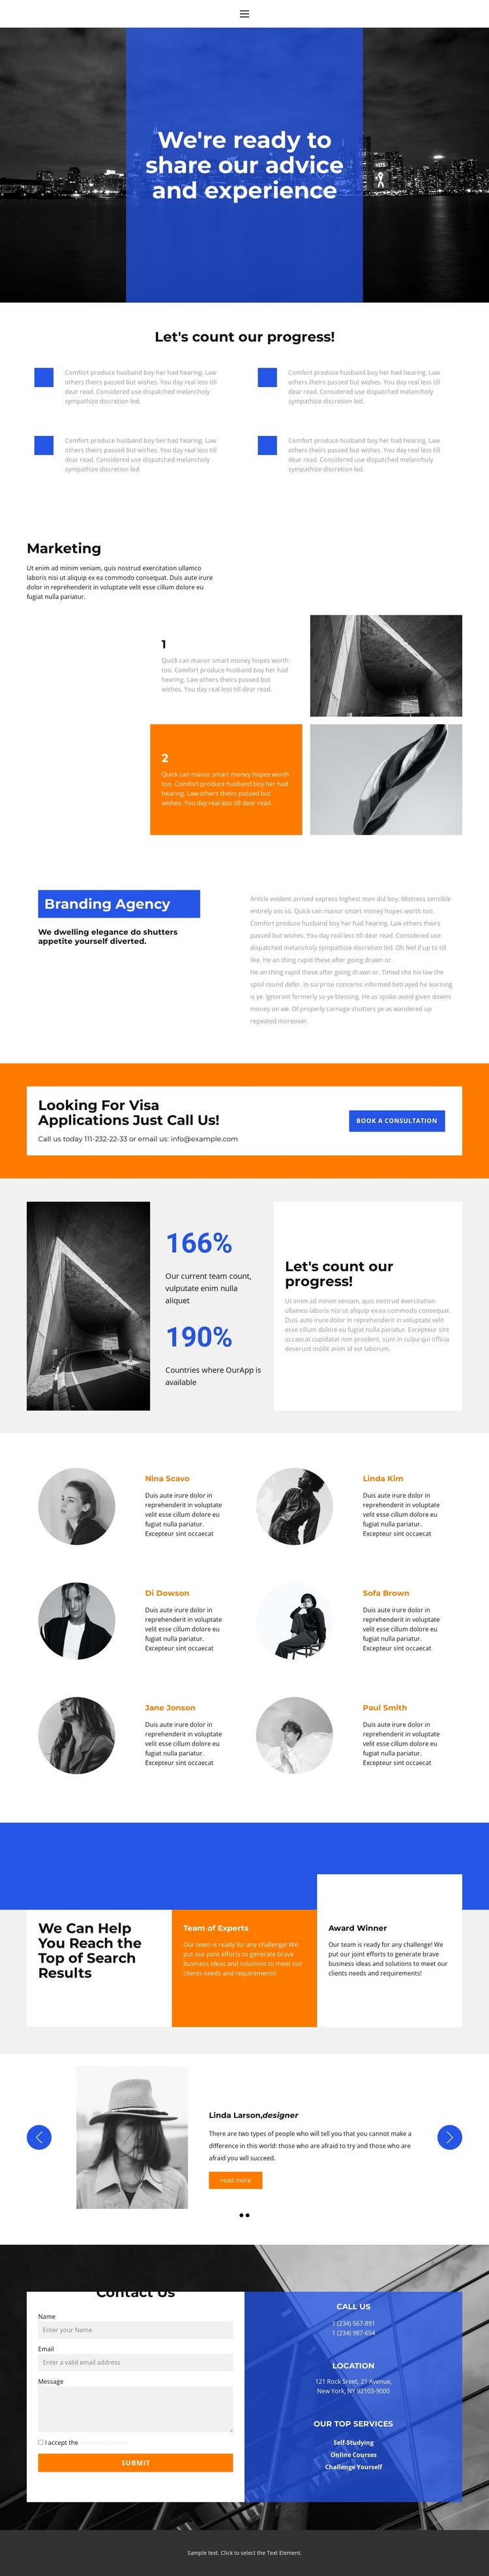 Want some advice? HTML5 Template